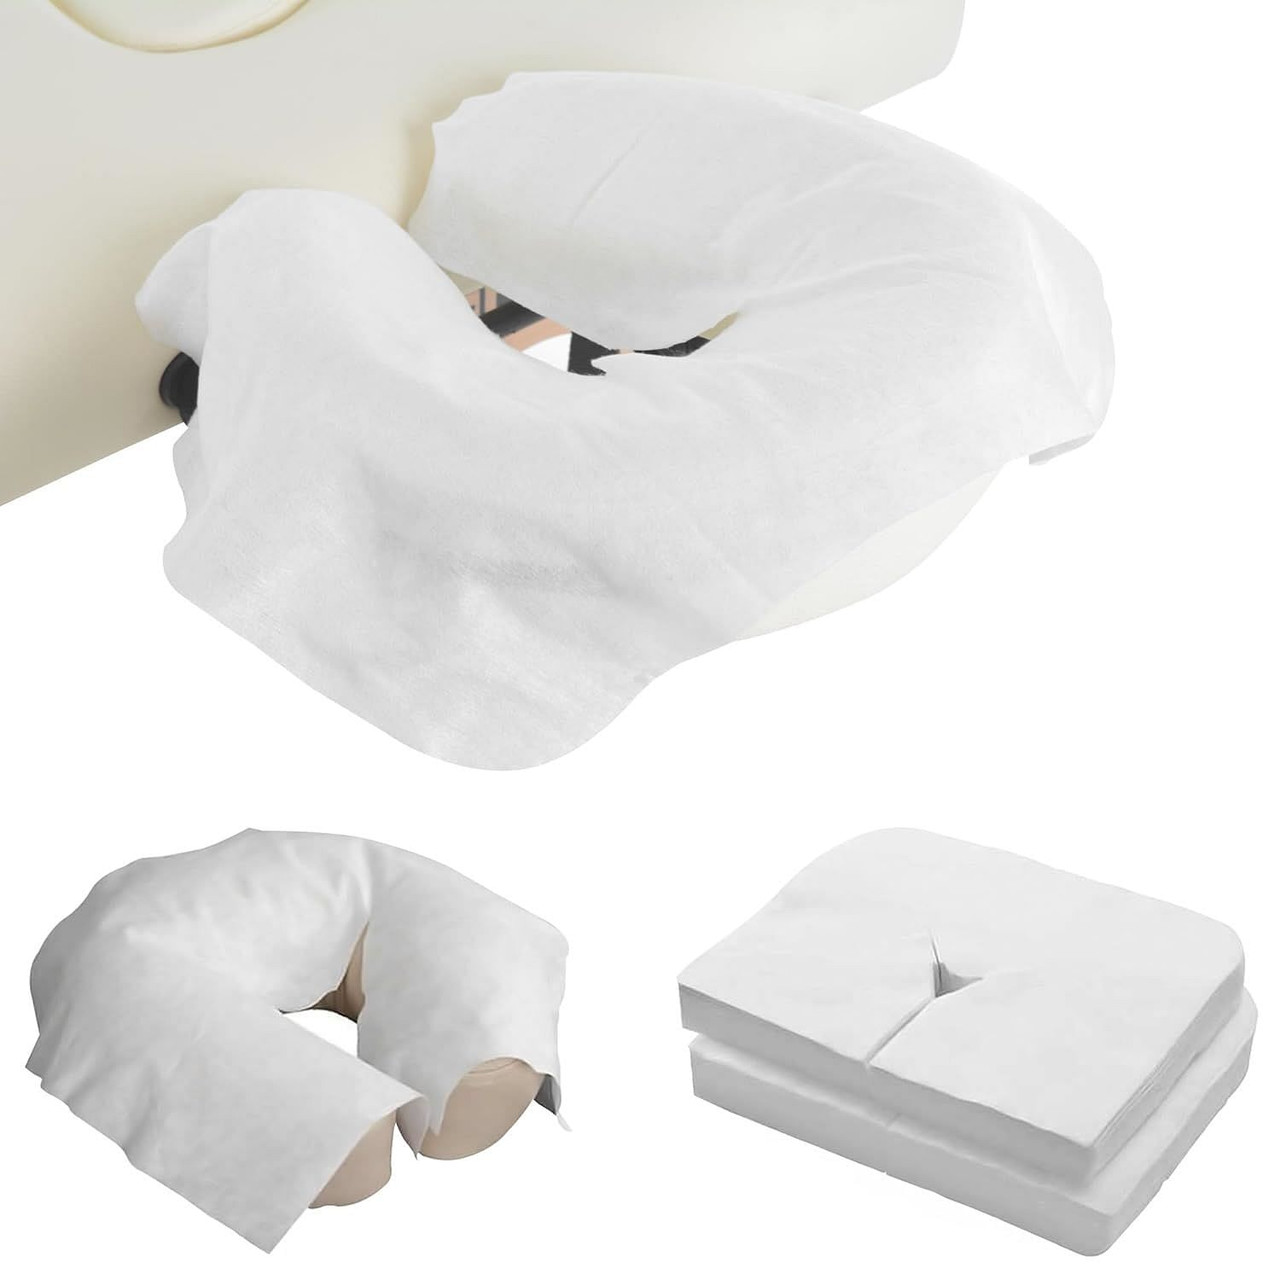 White Disposable Face Cradle Covers Pack of 1000, Disposable Massage Face Cradle Cover 12 x 16, Vis